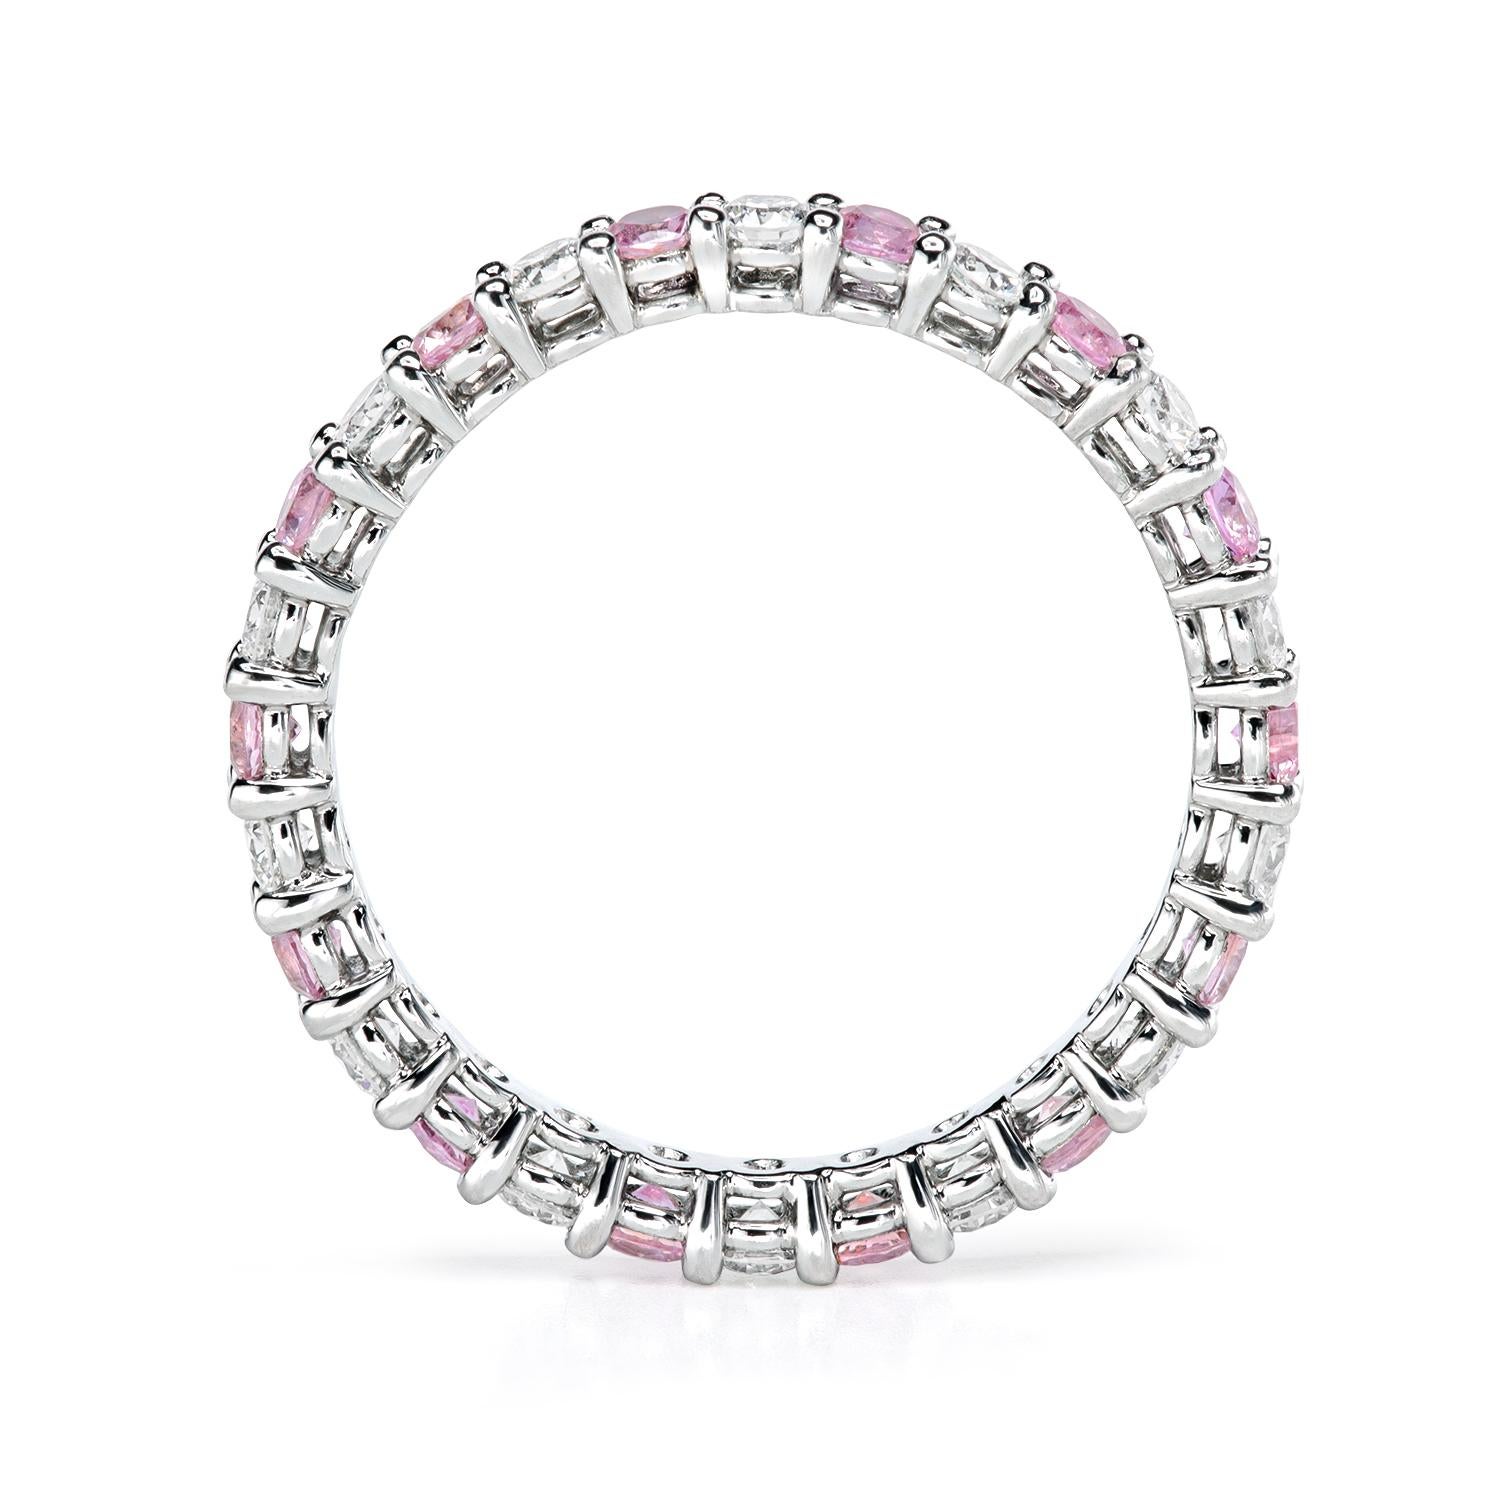 Contemporary “Grace“ wedding band with diamonds and pink sapphires by Leon Mege For Sale